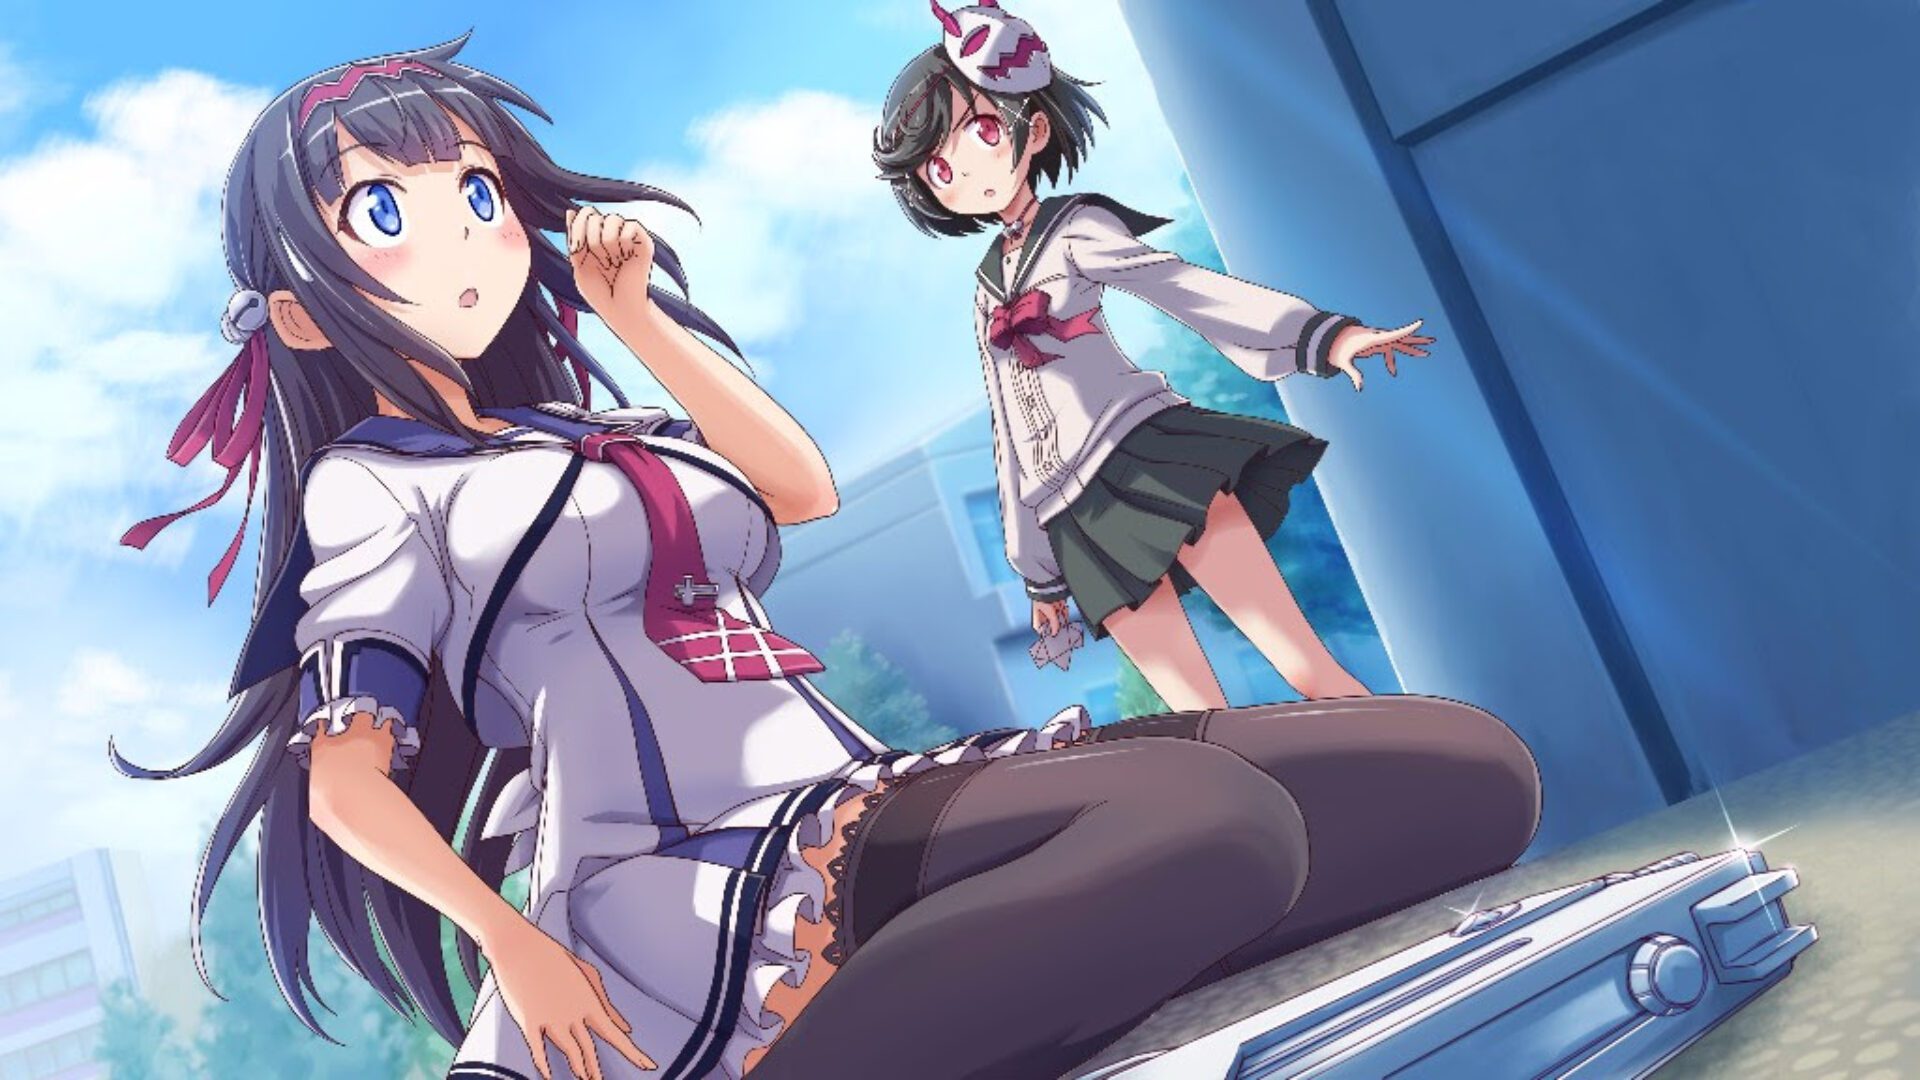 Gal*Gun Double Peace Out Now on PC